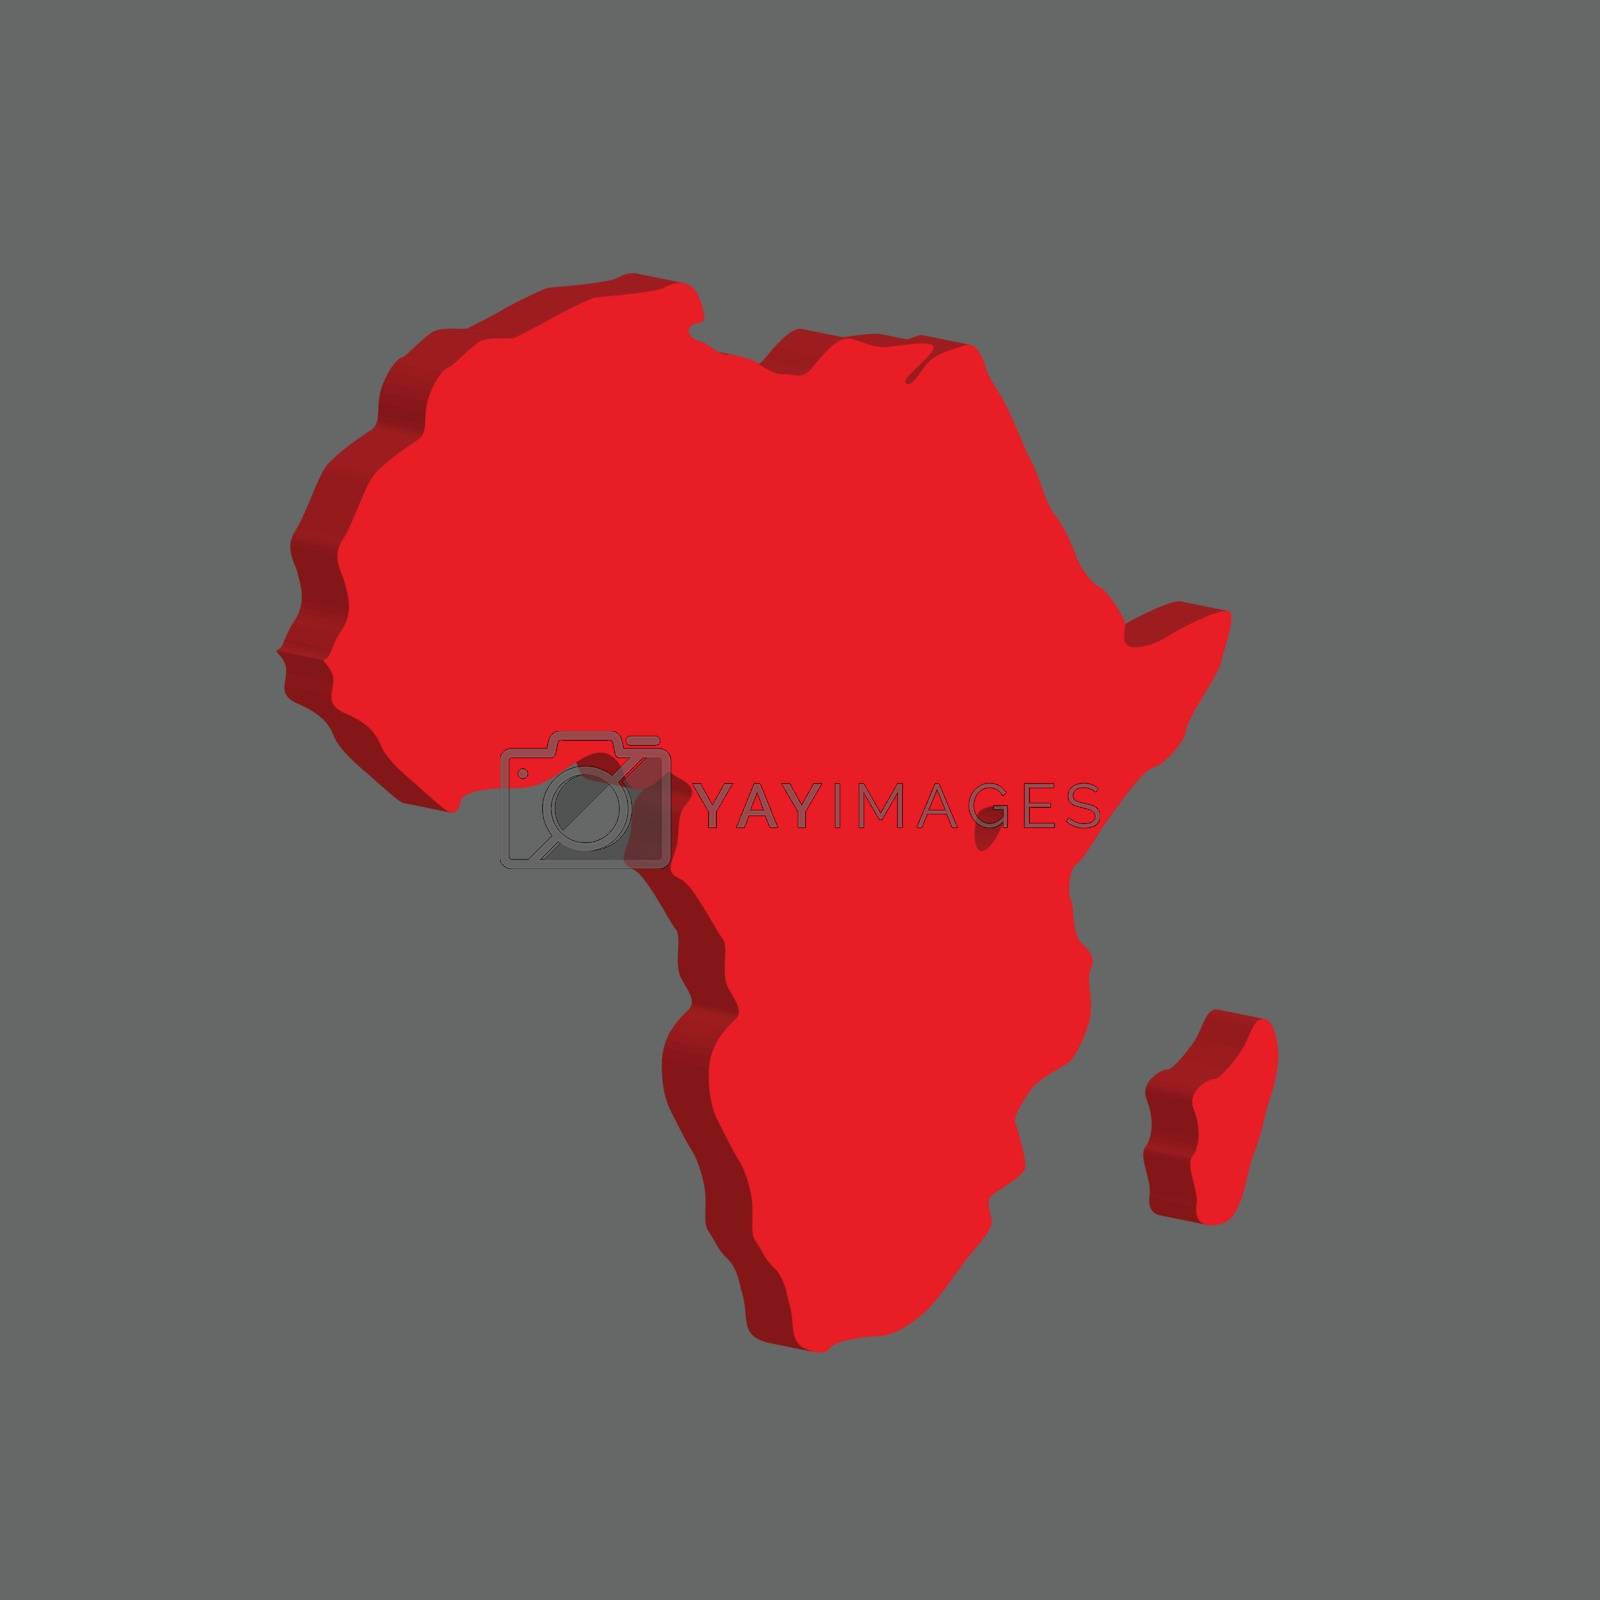 Royalty free image of The African continent. Vector illustration by byvivik89